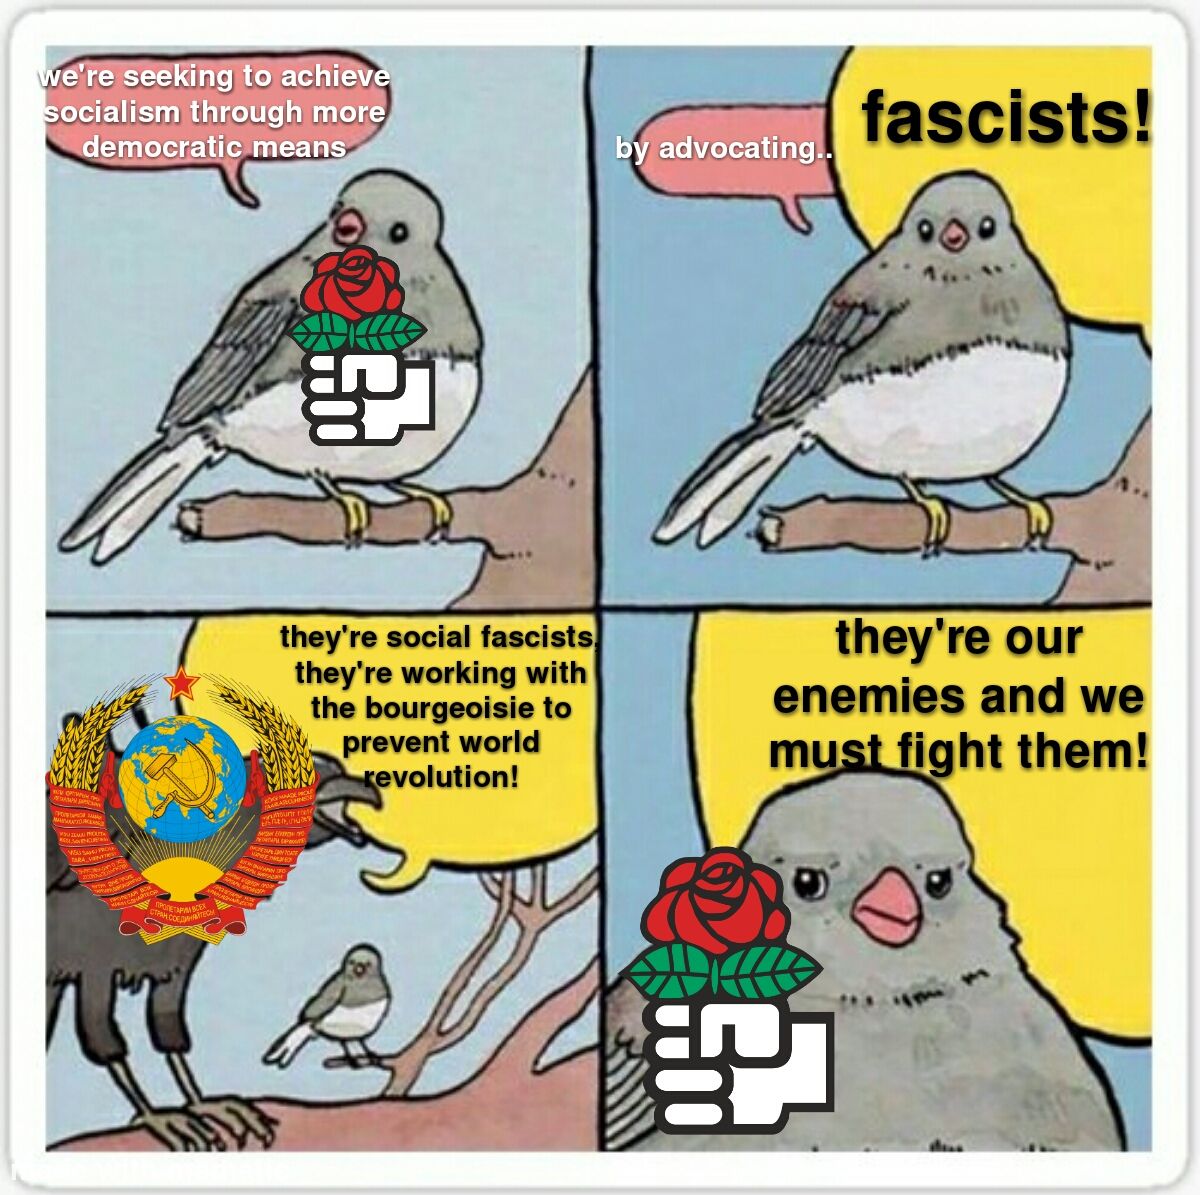 communist parties in the 1920s and 1930s be like